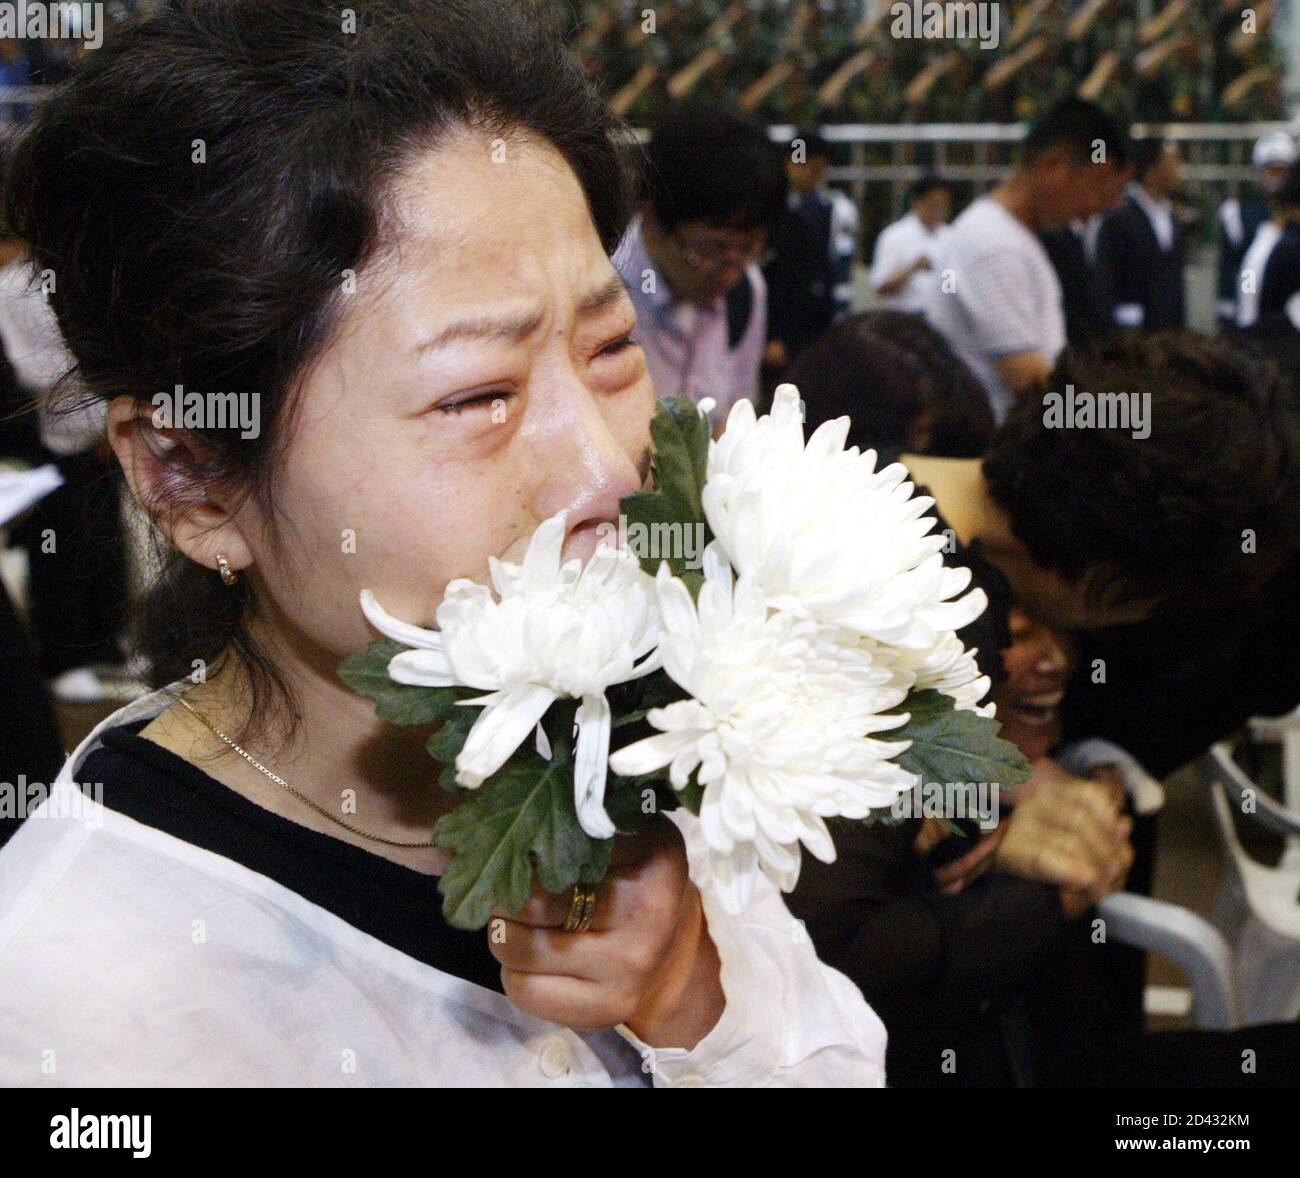 Relatives of soldiers killed during June 19 shooting incident, cry during funeral at military hospital in Songnam.  Relatives of soldiers killed during the June 19 shooting incident, cry during a funeral at a military hospital in Songnam, about 25 km (16 miles) southeast of Seoul, June 25, 2005. A bullied private, officially identified only as 'Kim', tossed a grenade on June 19, 2005 among barrack comrades and then opened fire, killing 8 soldiers, at a guard post in Yonchon, about 60 km (40 miles) north of Seoul, the Defence Ministry said. REUTERS/Stringer/Pool Stock Photo